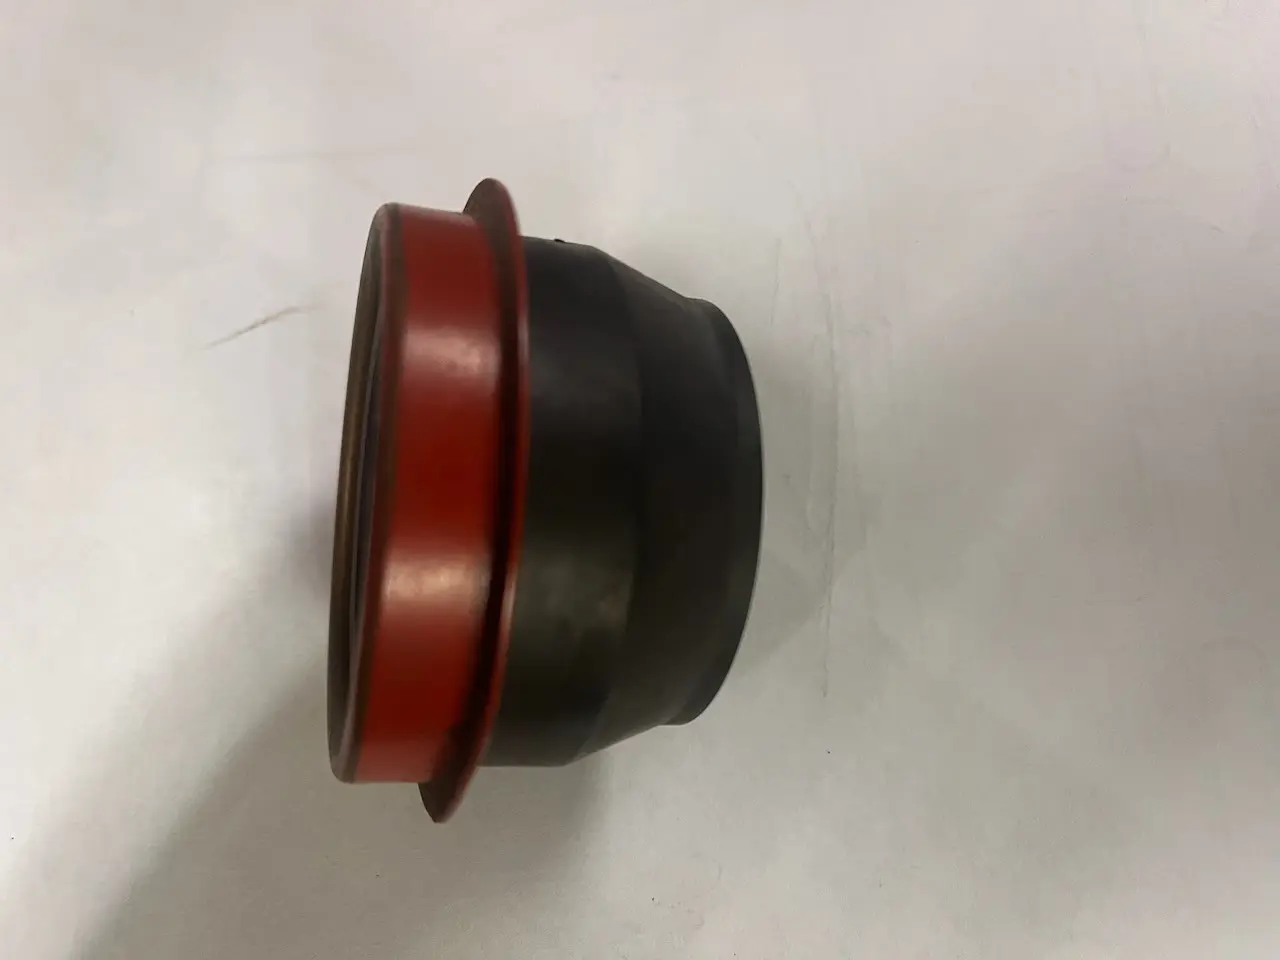 A black and red rubber cap sitting on top of a white surface.